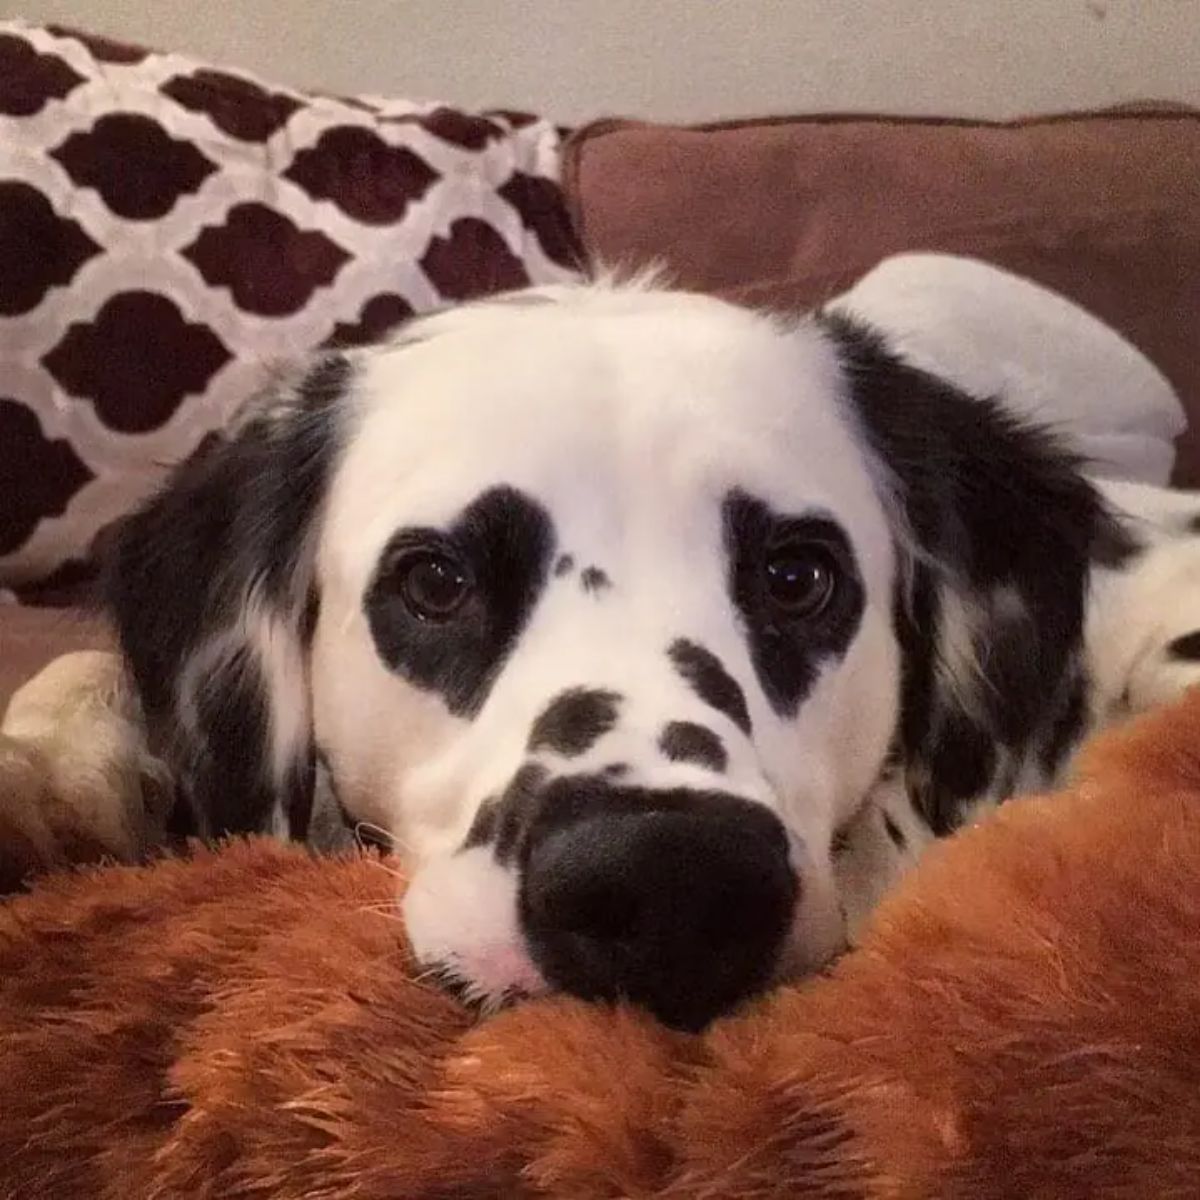 black and white dalmation laying on brown blanket with black heart markings around the eyes